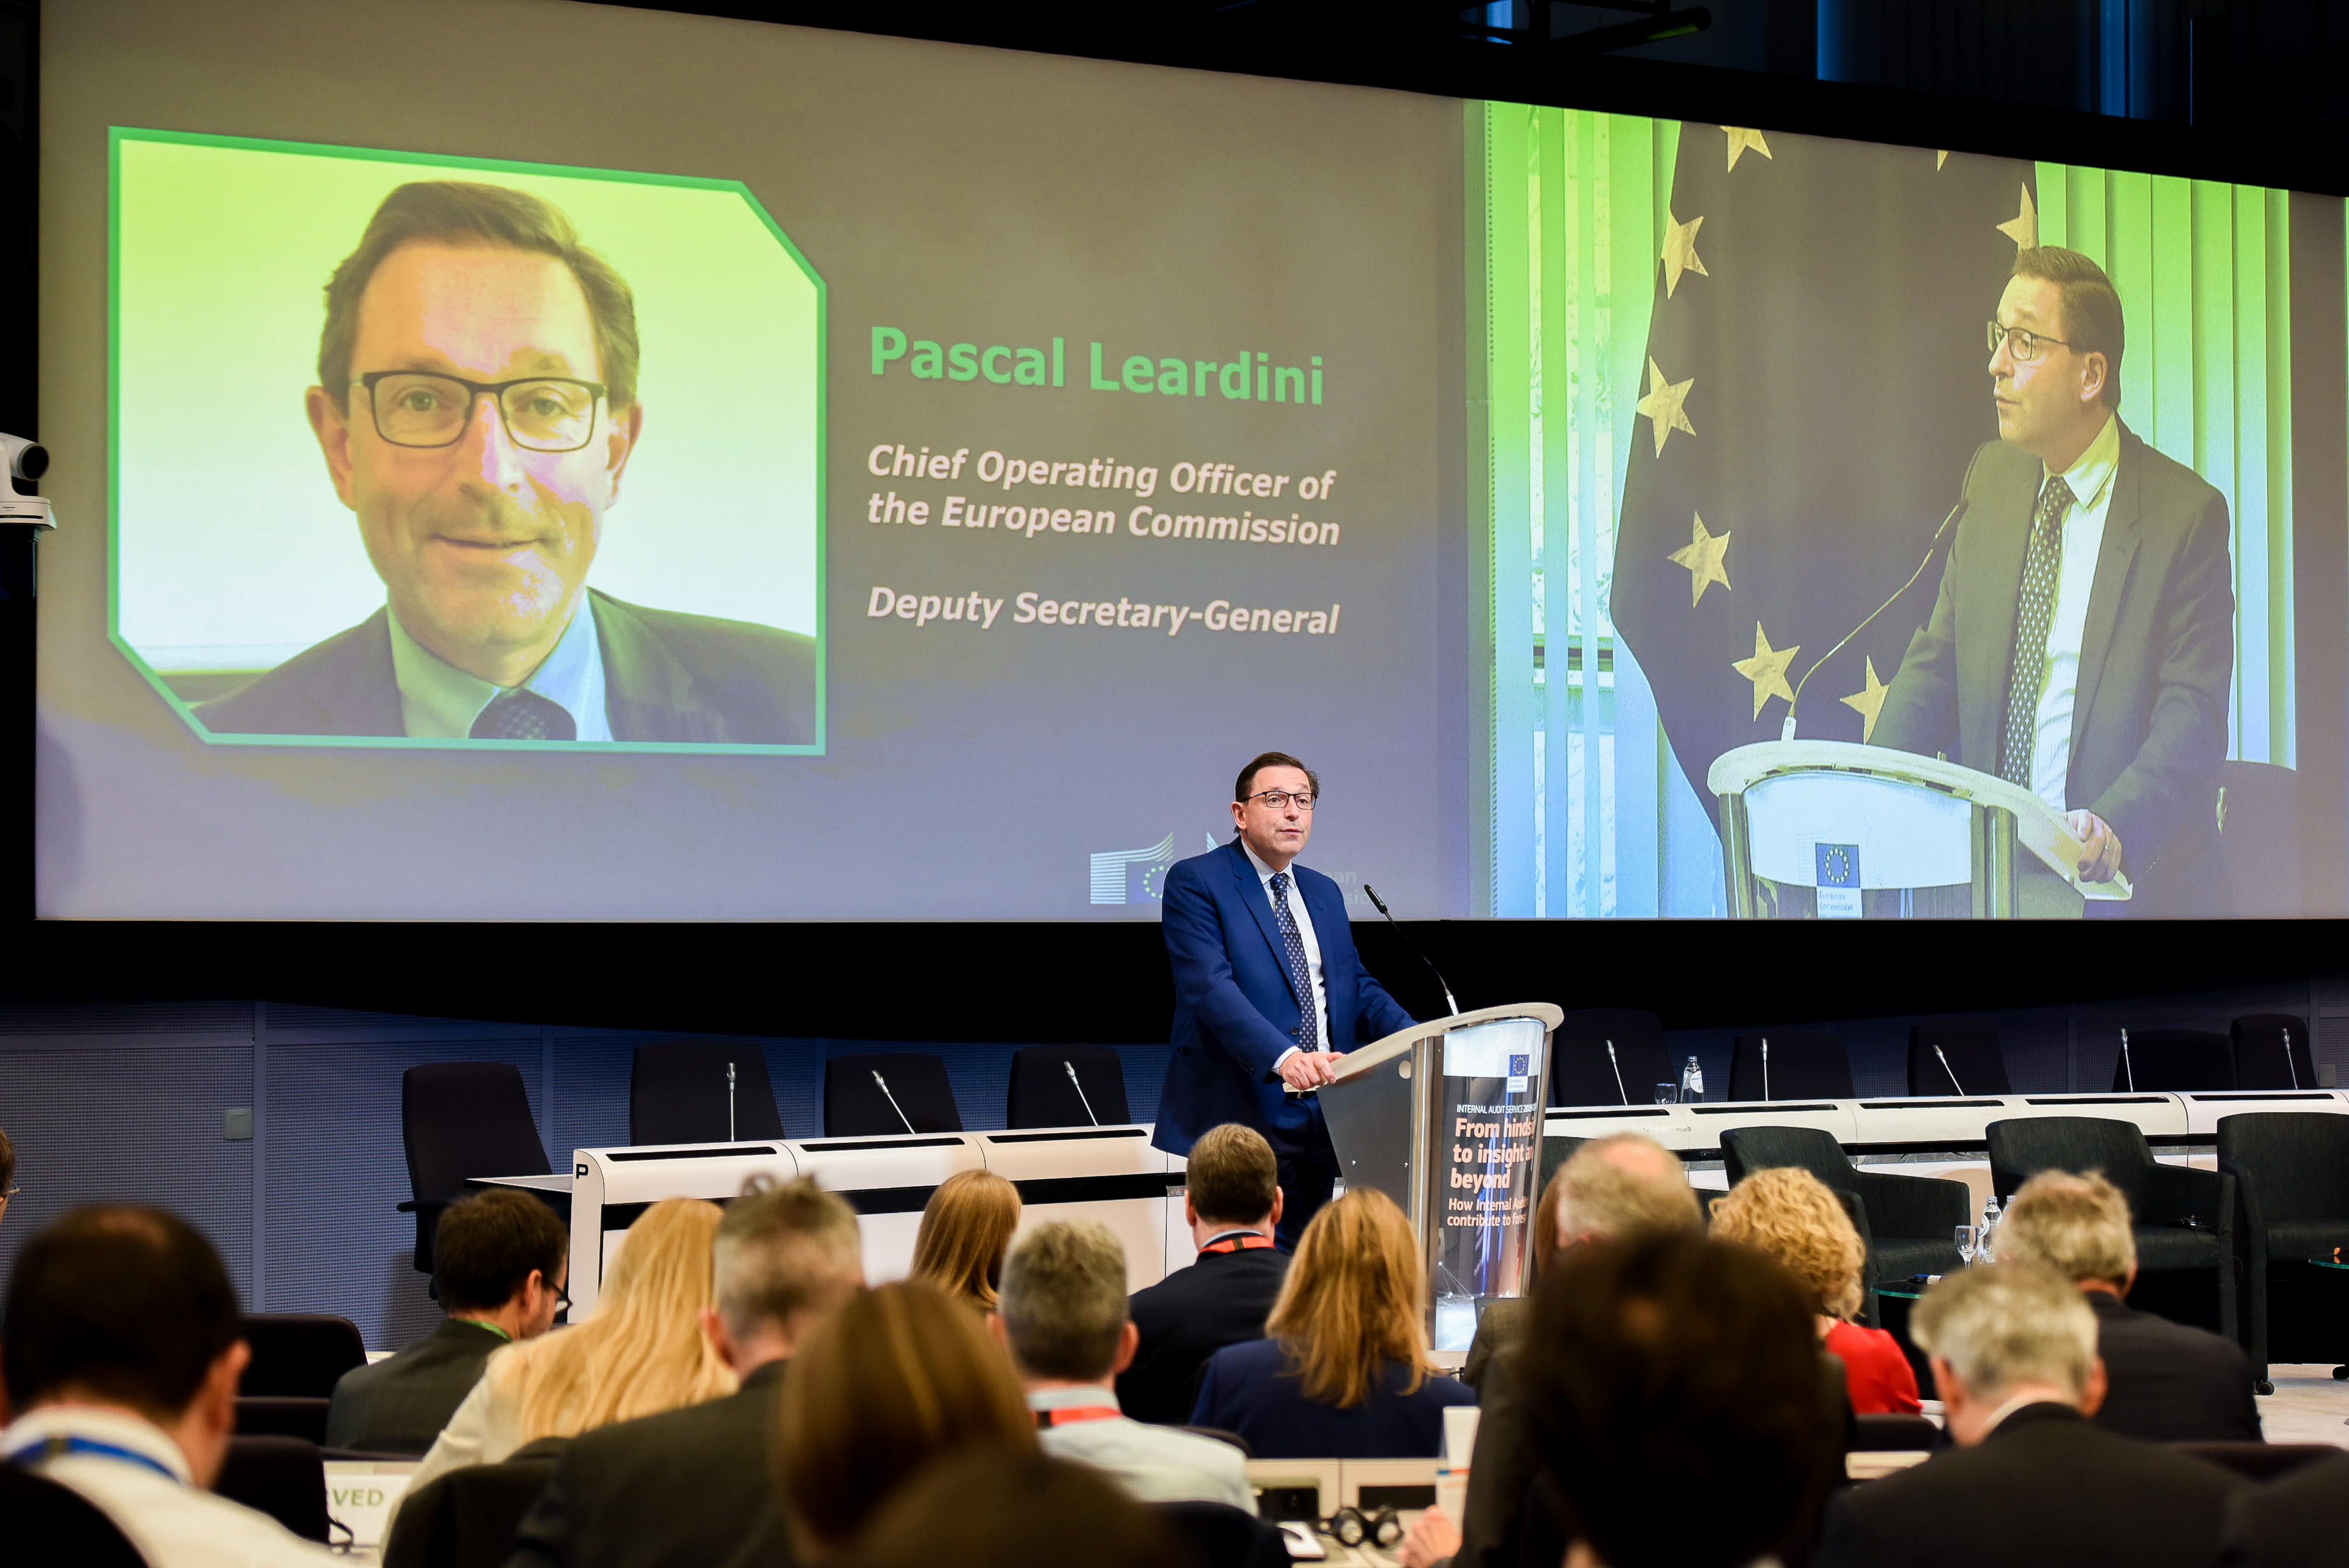 Pascal Leardini at the Internal Audit Service Conference 2019